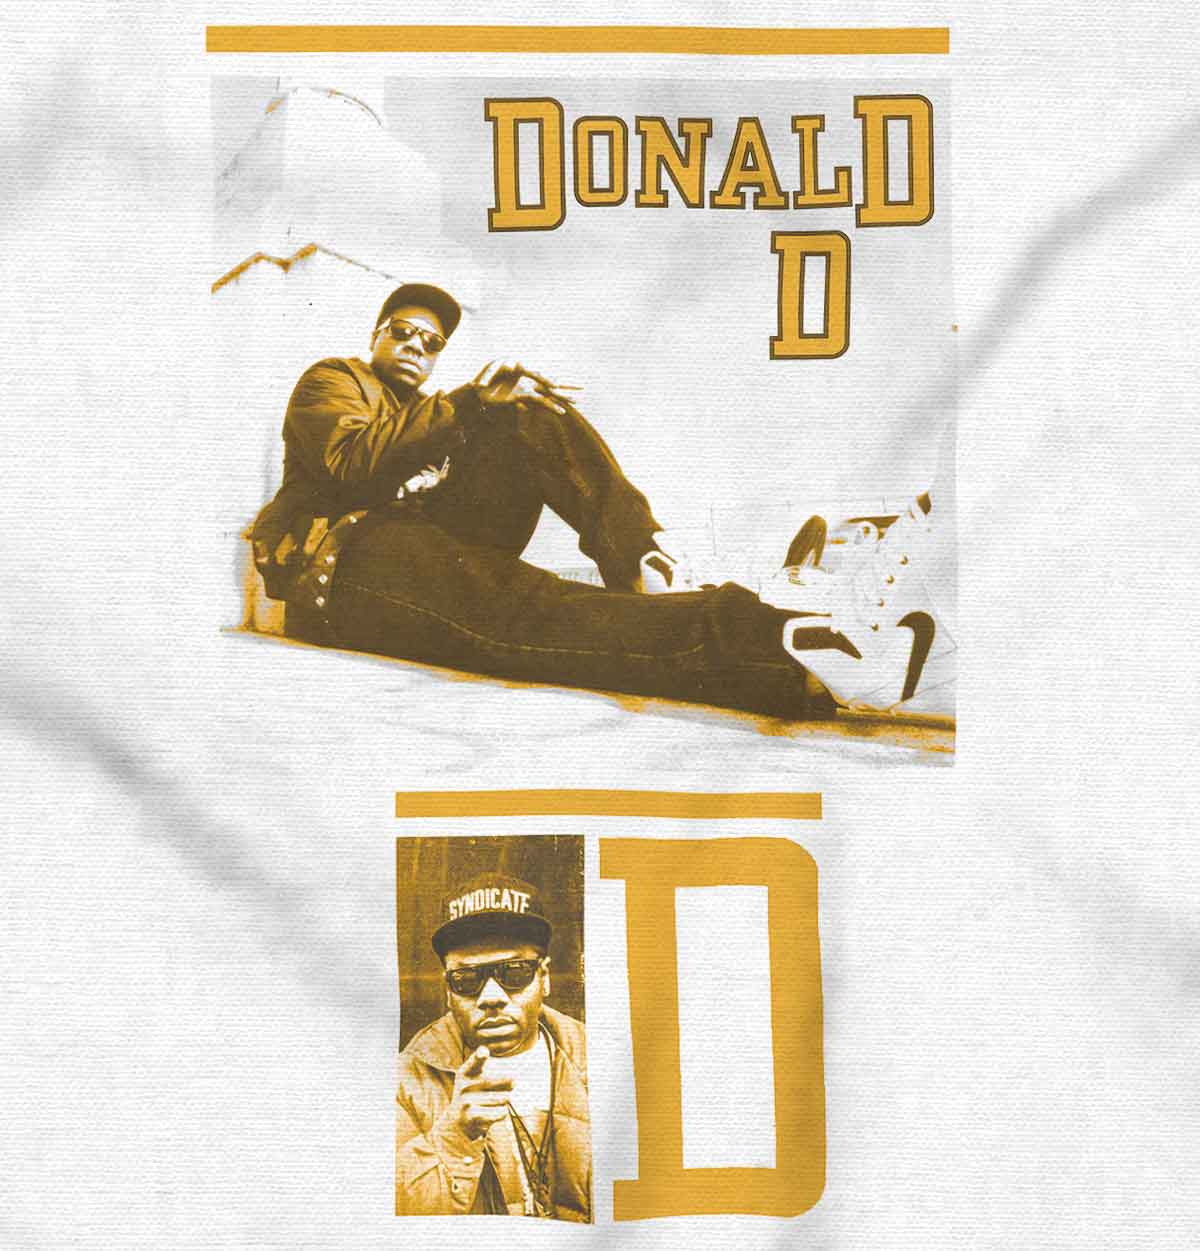 This design honors the influential hip-hop artist Donald D, showcasing his legendary artist, representing his legacy and embodying the energy and charisma of hip-hop.